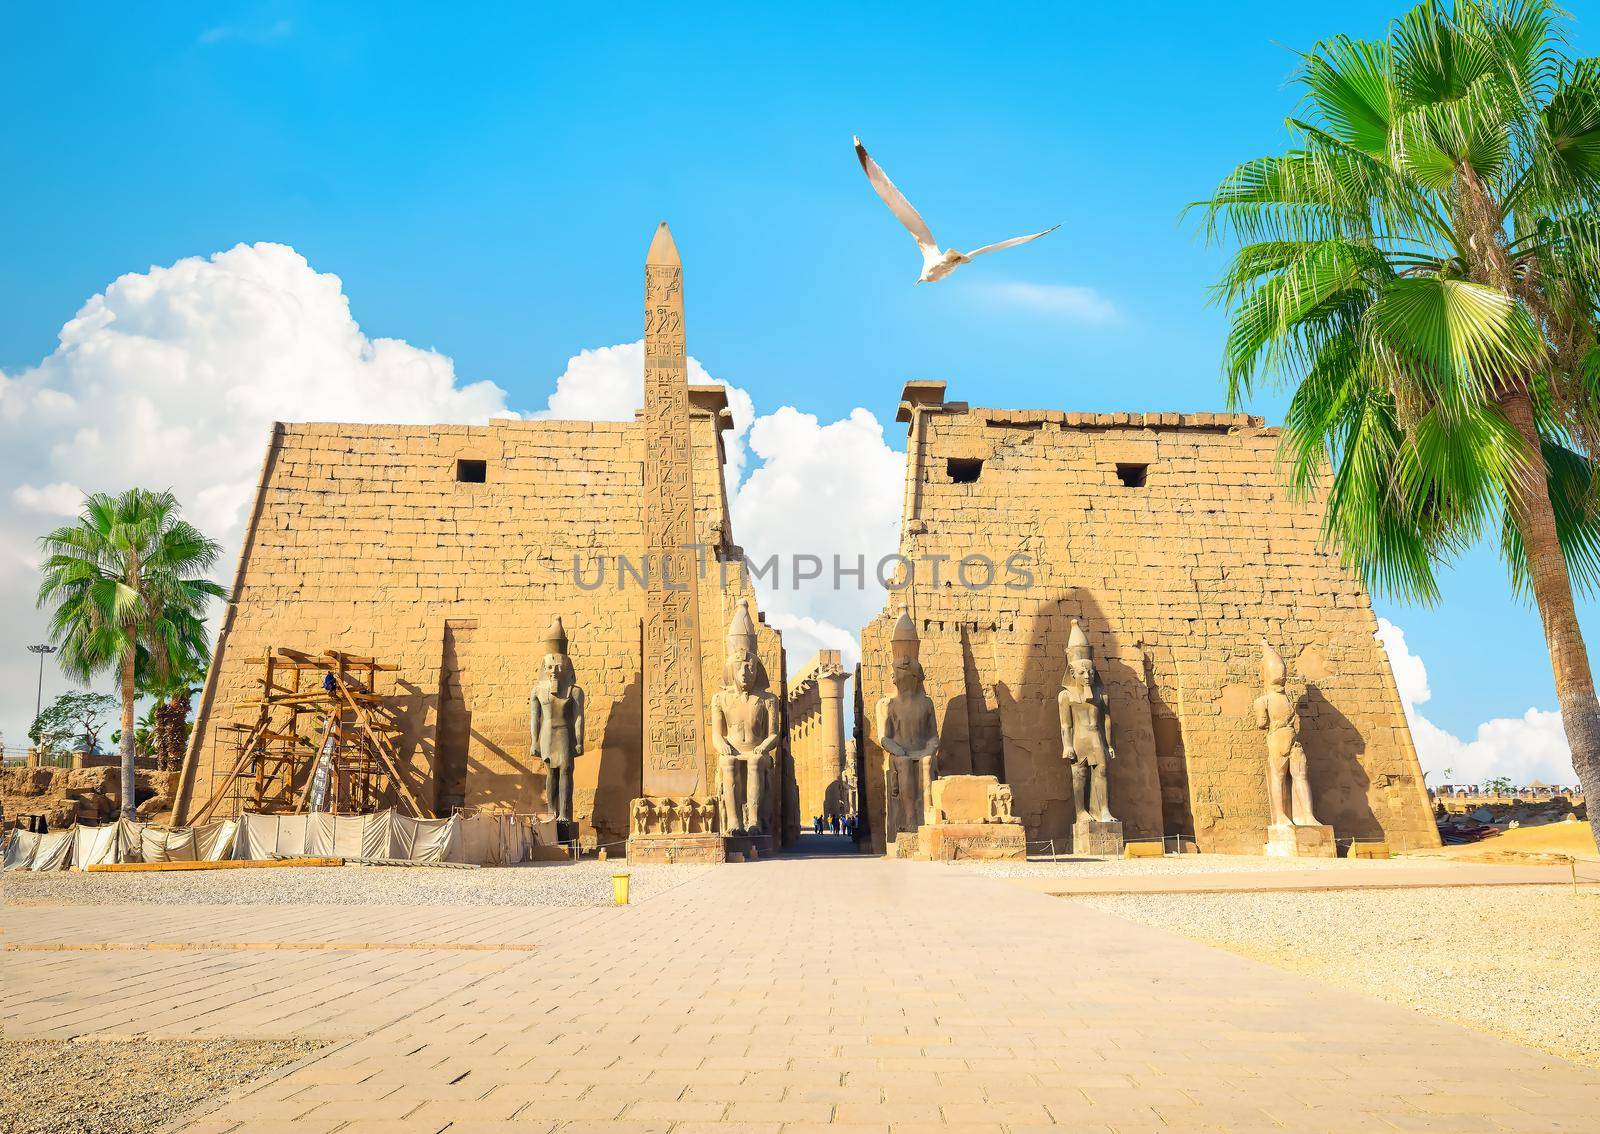 The ancient Luxor temple by Givaga